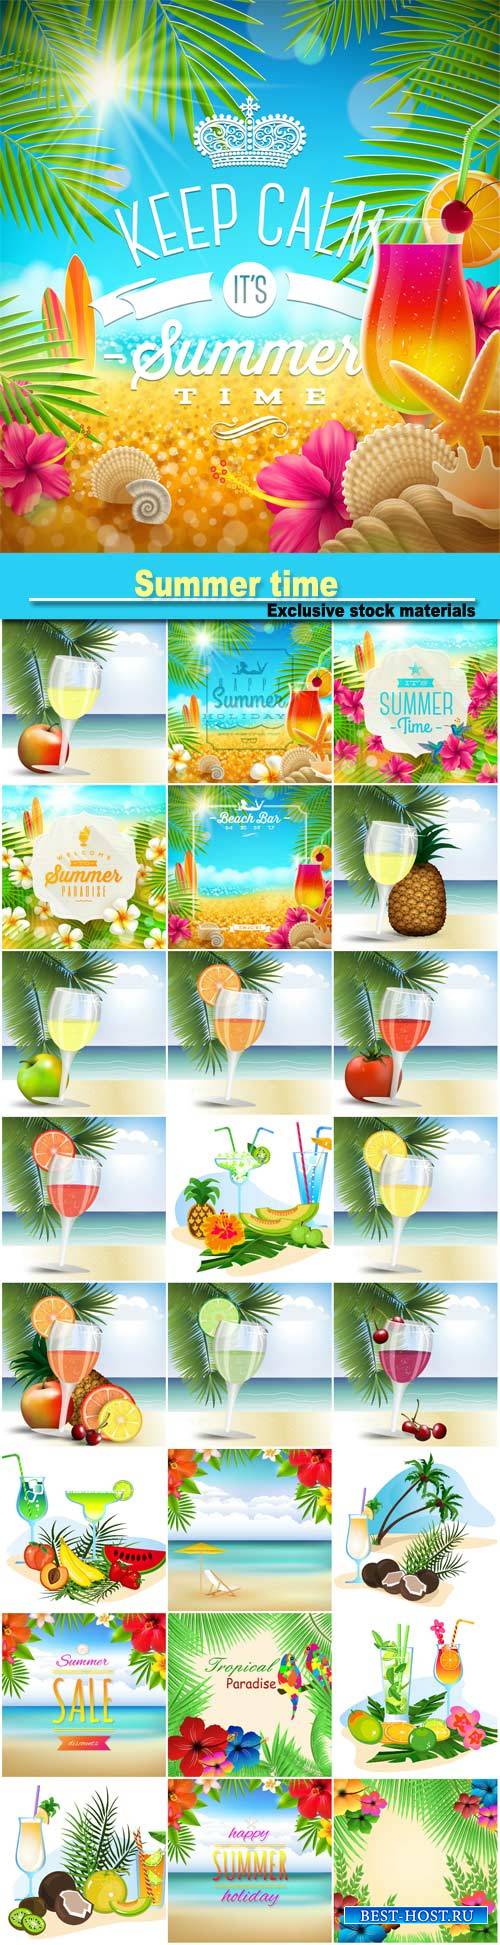 Summer time, tropical paradise, cocktails and fresh juices